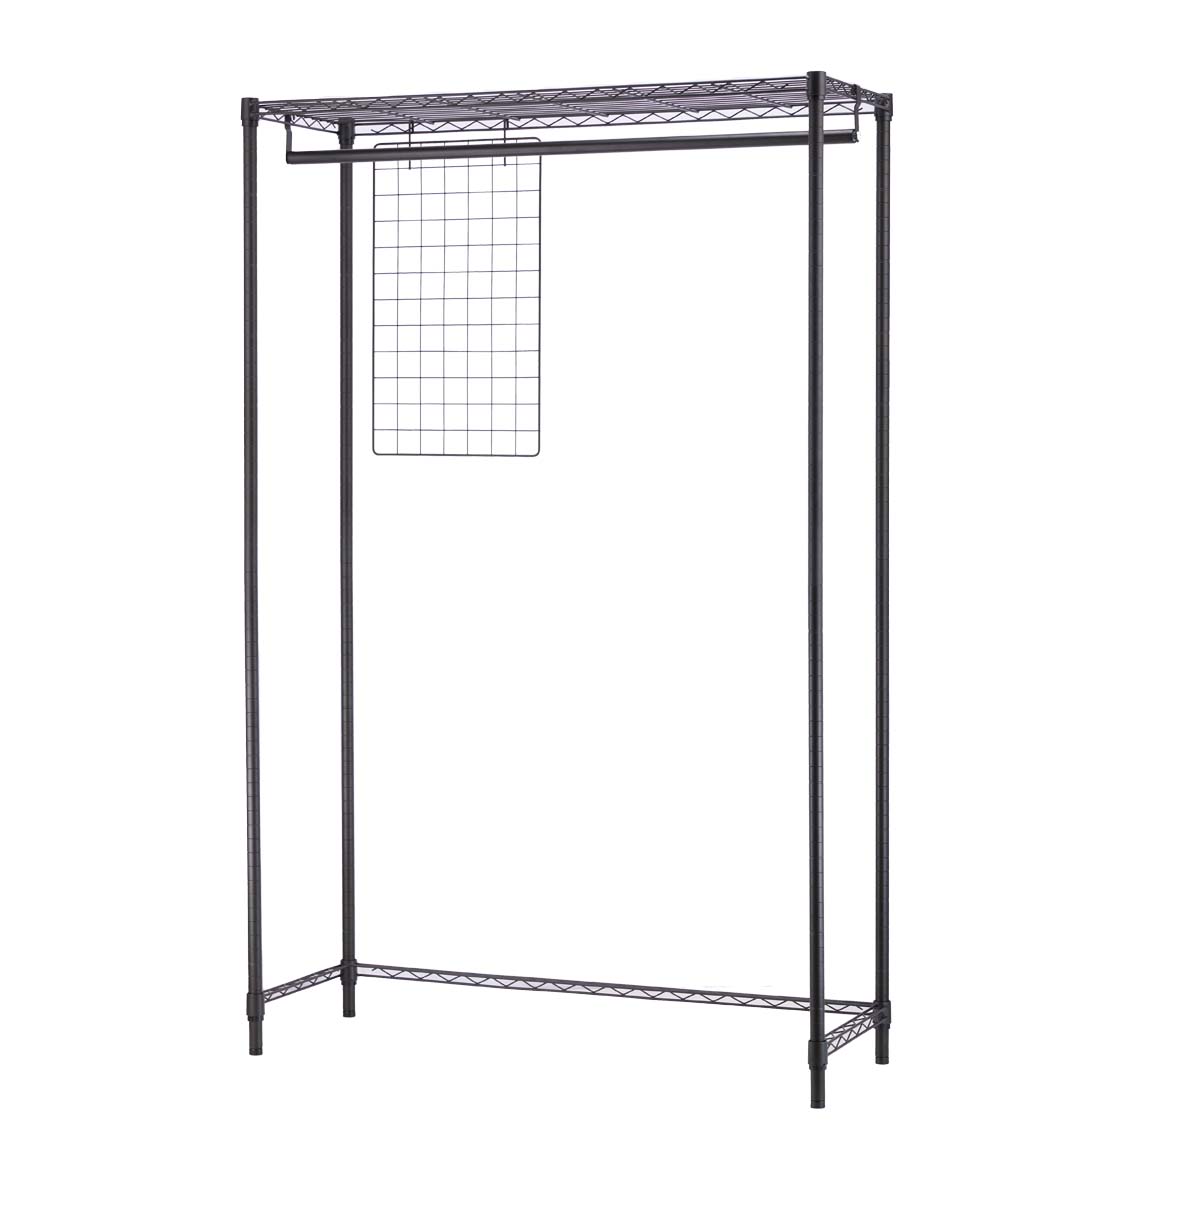 1-Tier Washing Machine Rack with Hanging Rod Hooks and Basket